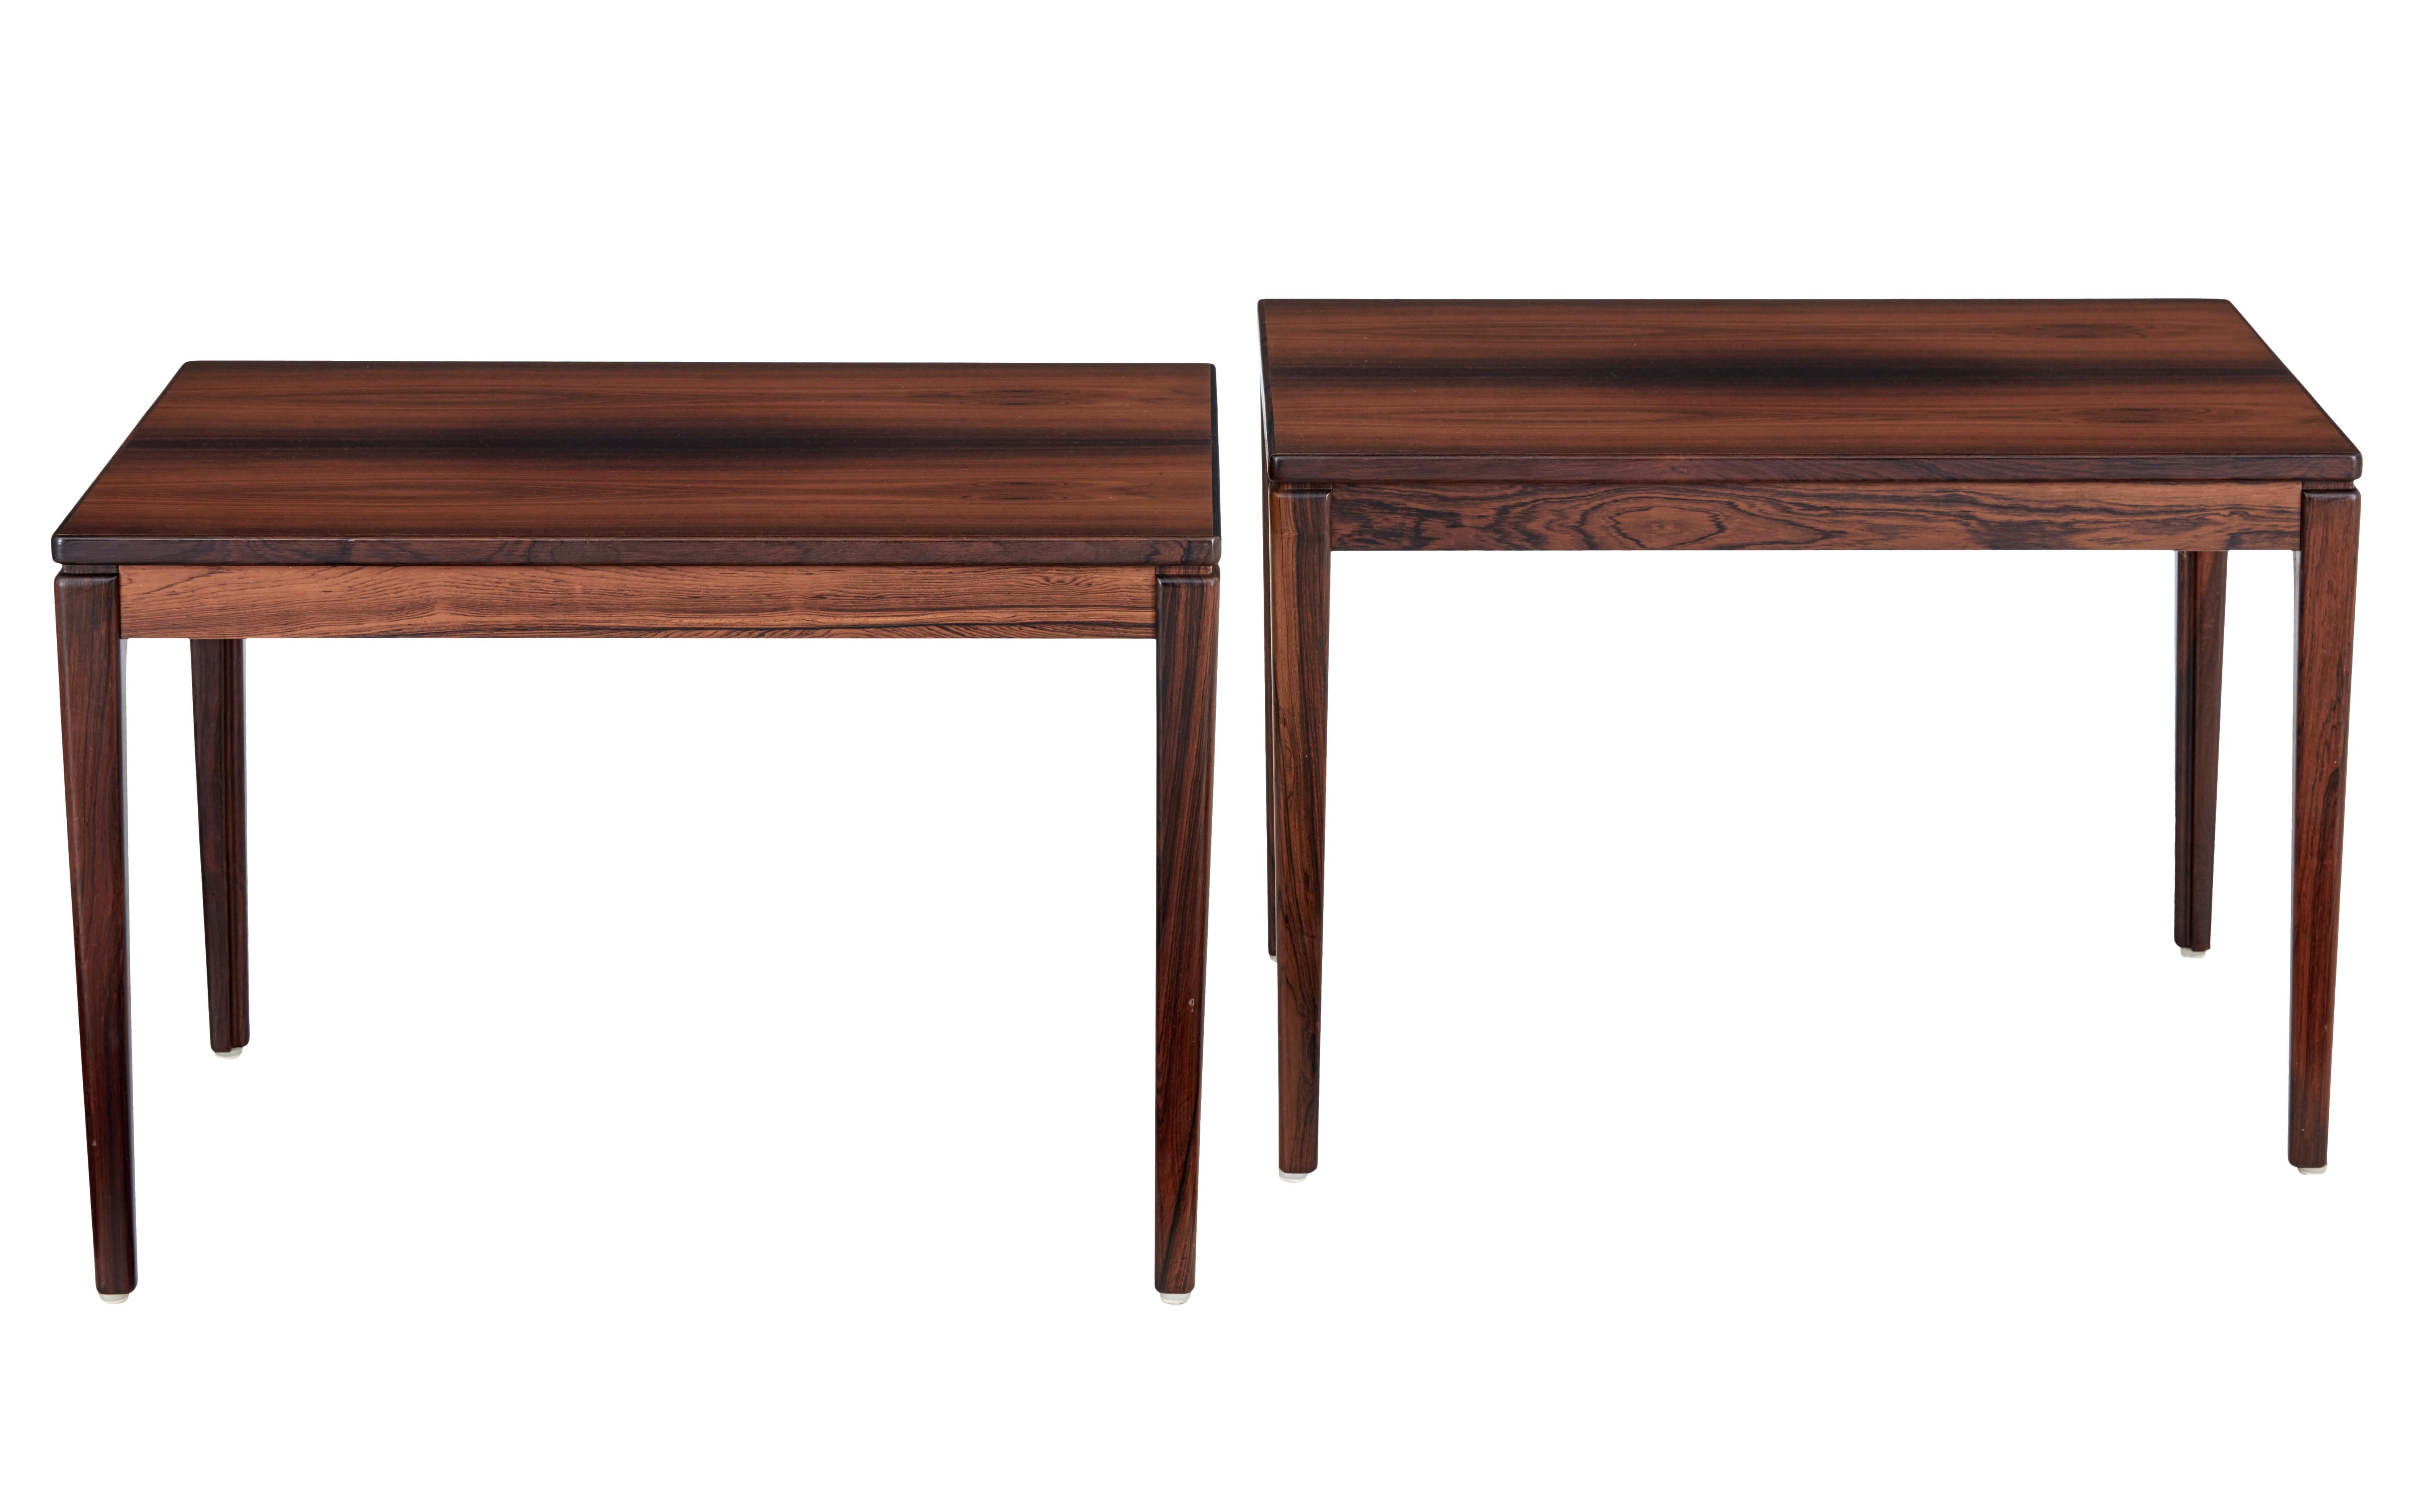 Pair of palisander side tables by Ulferts Möbler, circa 1970.

Fine quality pair of Swedish made rosewood side tables, produced by Ulferts Möbler. Simple but elegant design made from striking veneers, standing on tapering legs.

Many